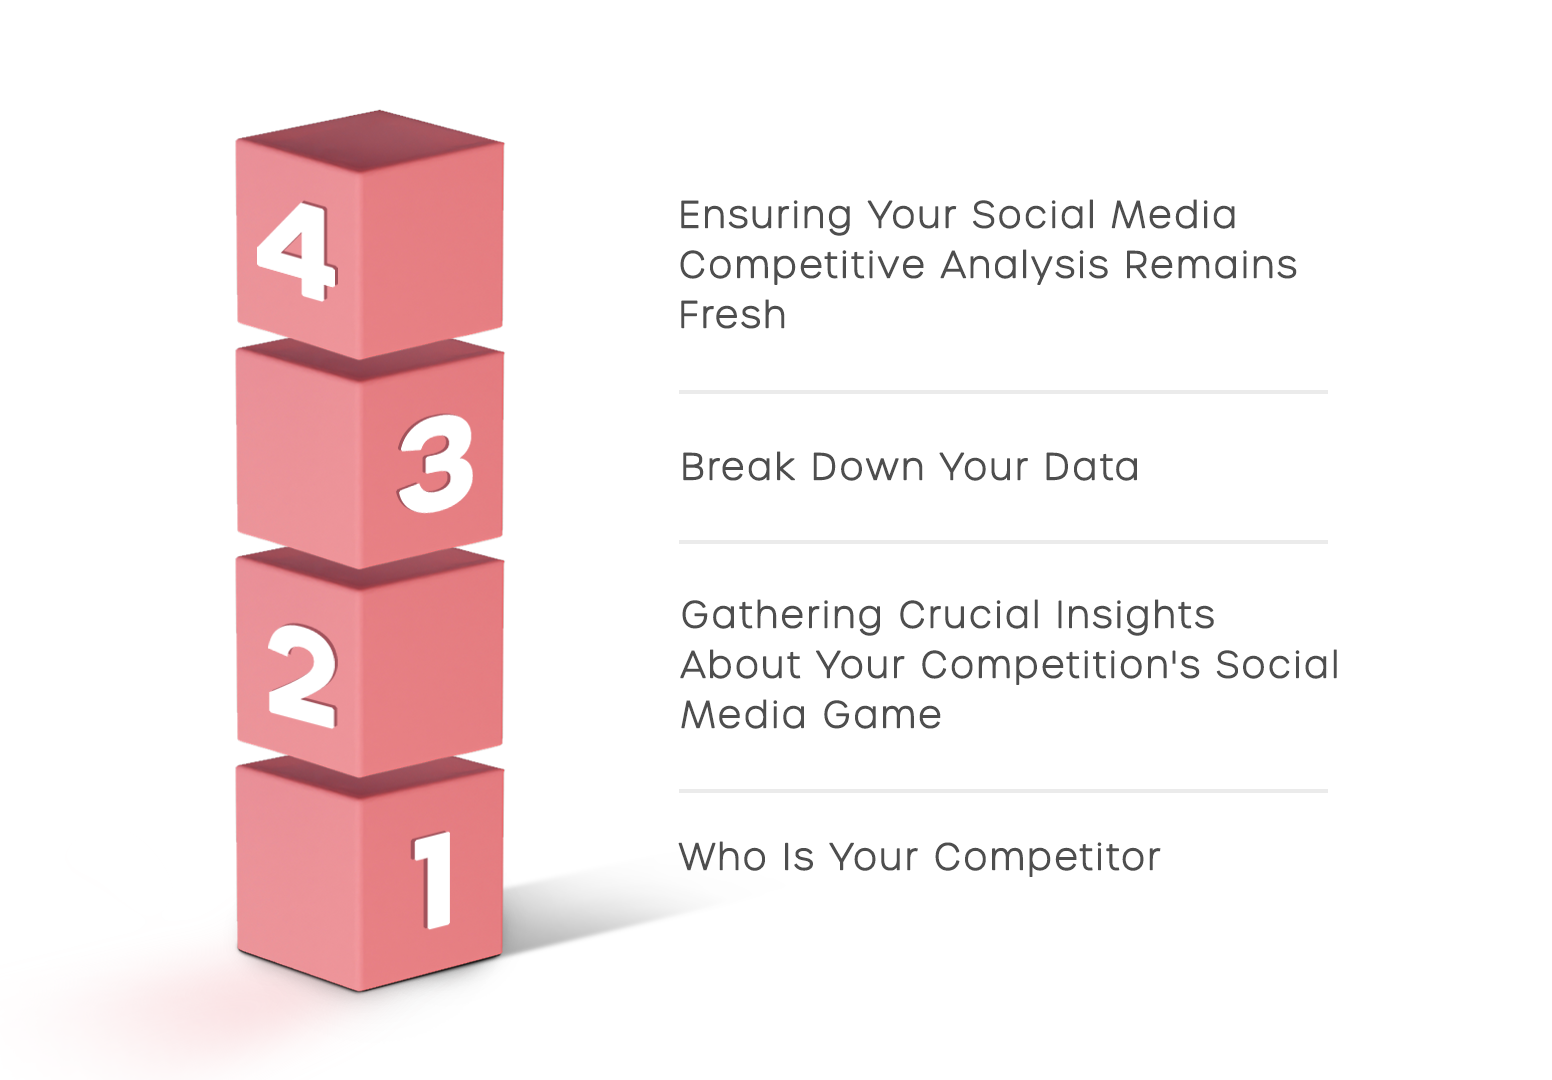 An efficient social media competitive analysis is based on four building blocks.